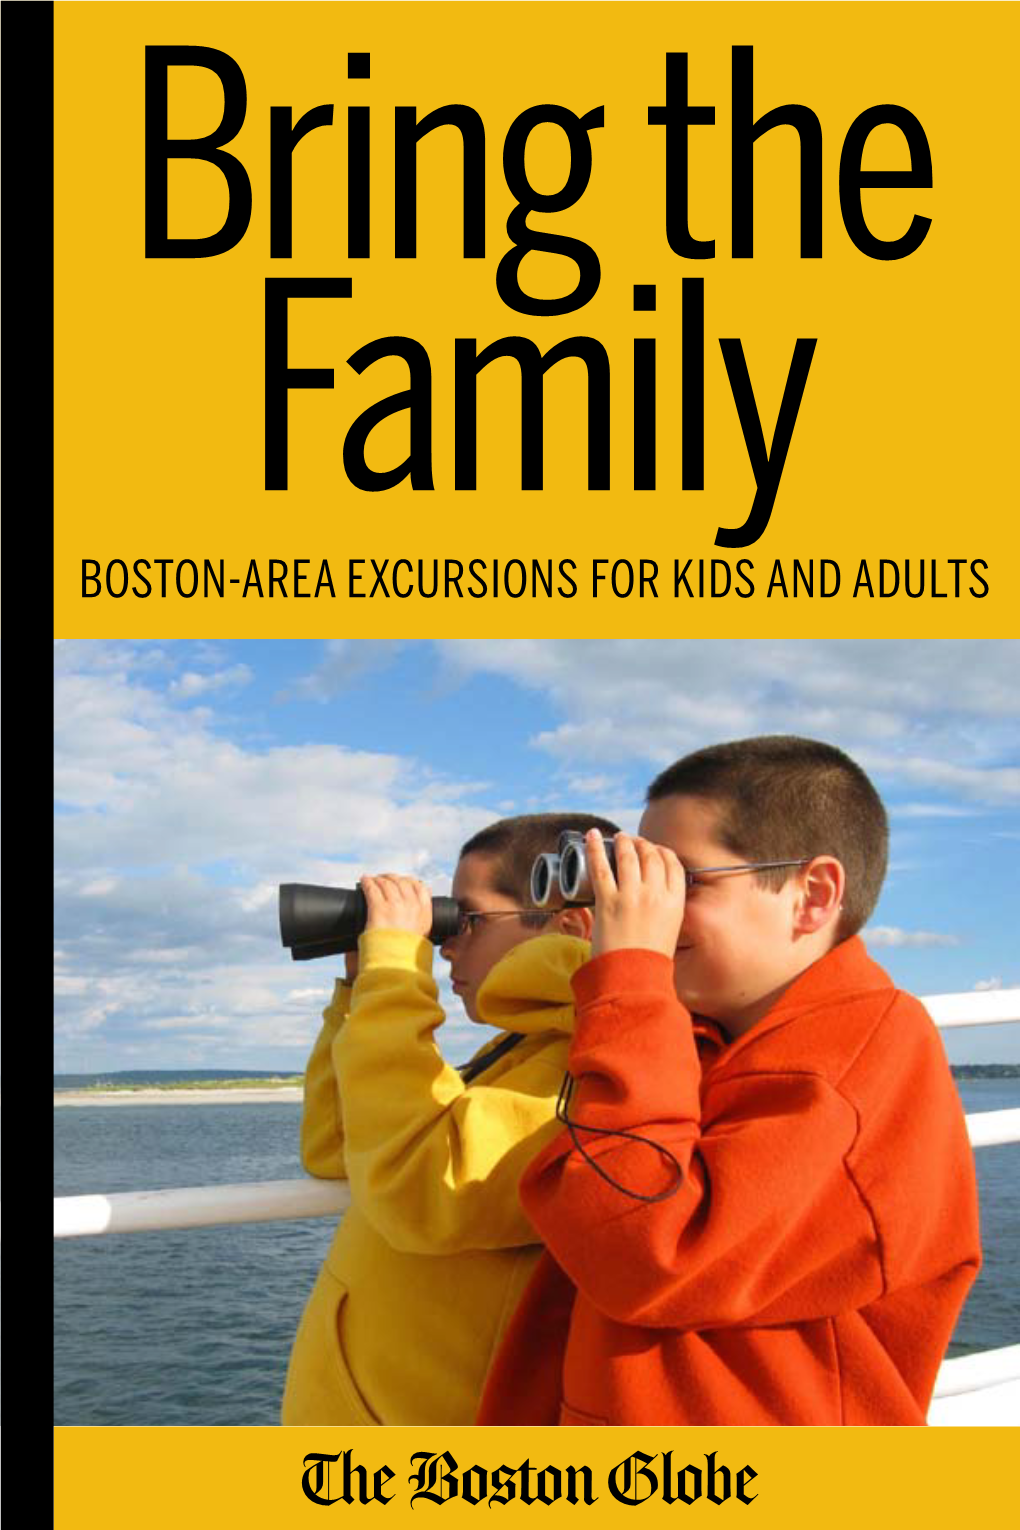 Bring the Family Boston-Area Excursions for Kids and Adults